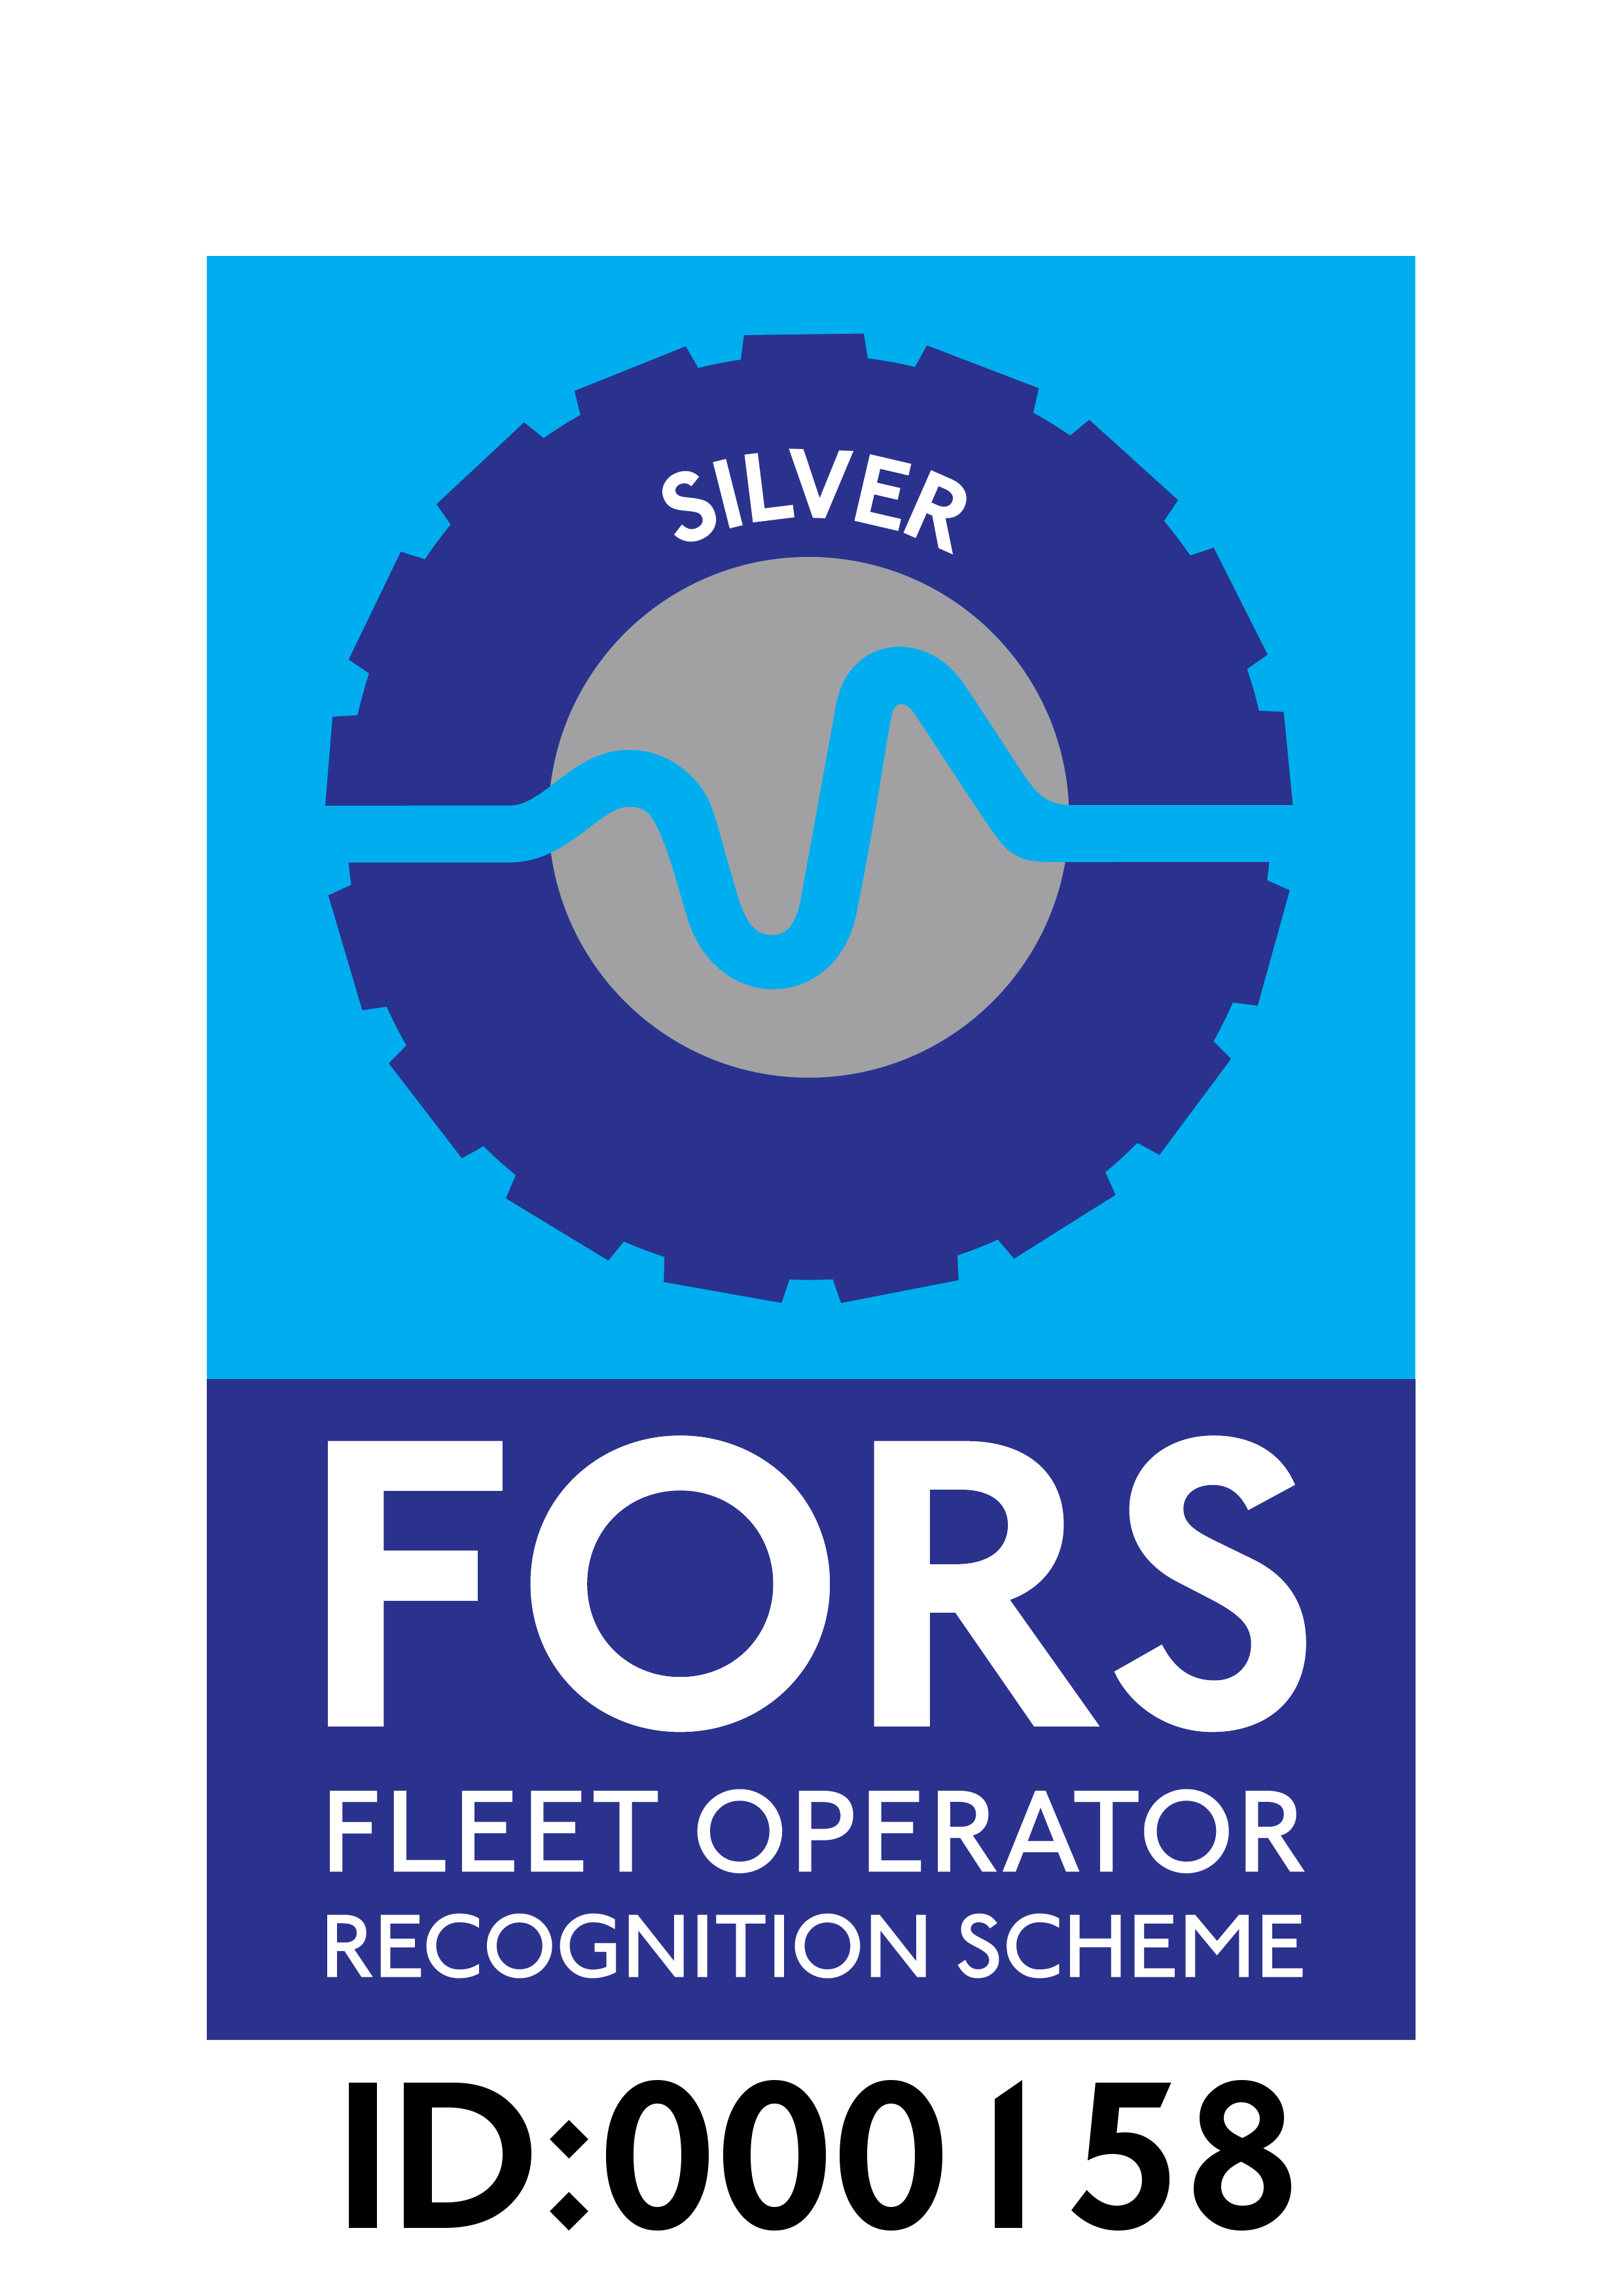 000158 FORS silver logo